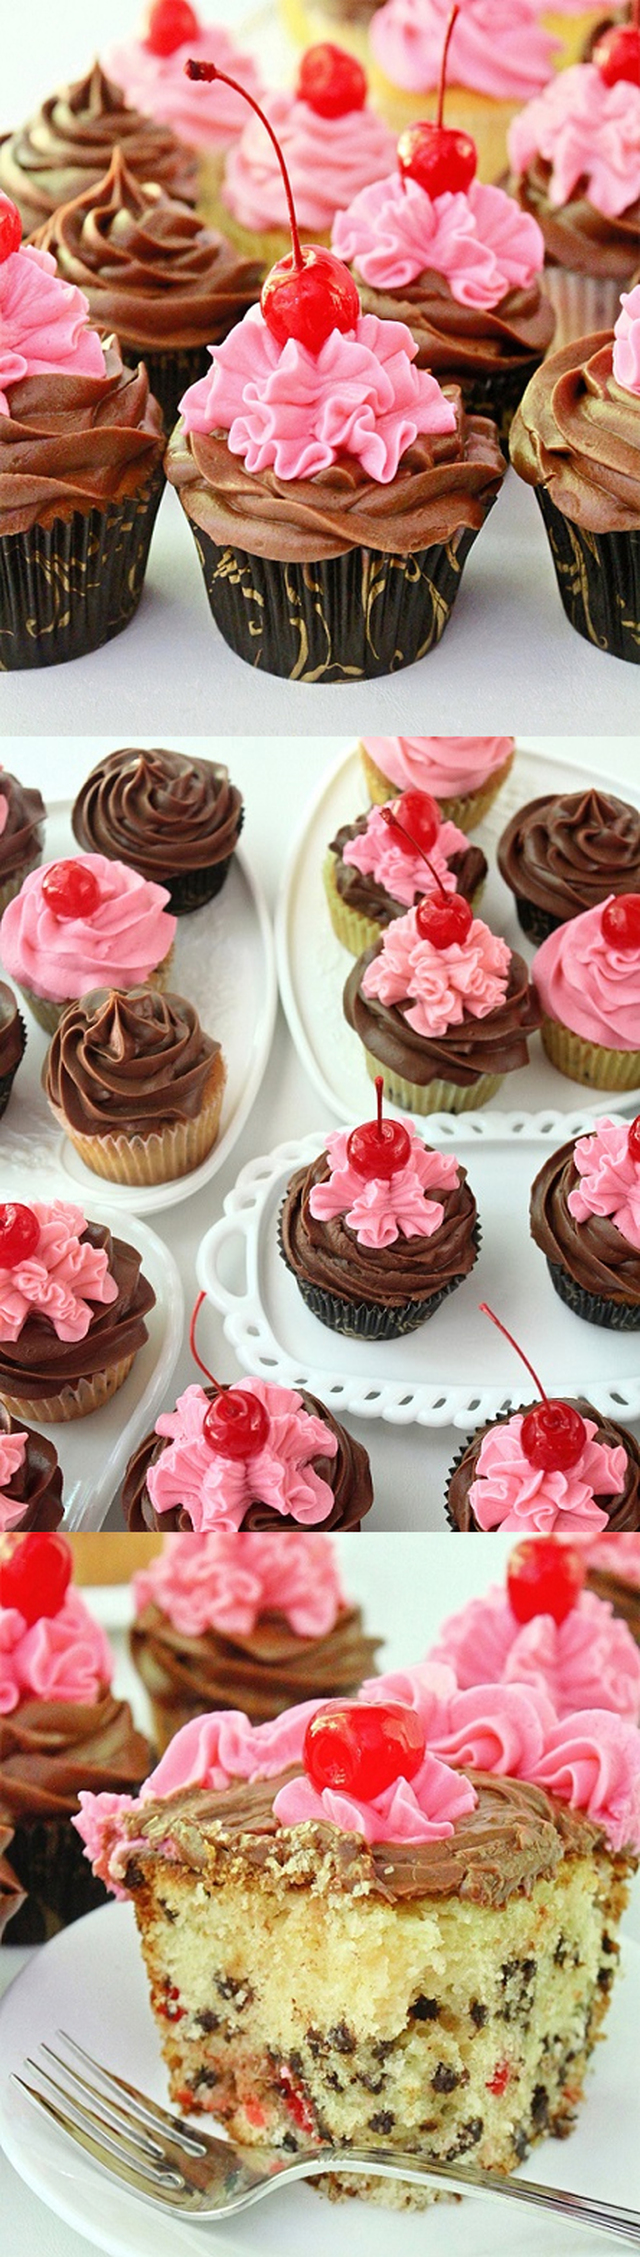 Cherry Cupcakes with Chocolate Chips and Buttercream Frosting